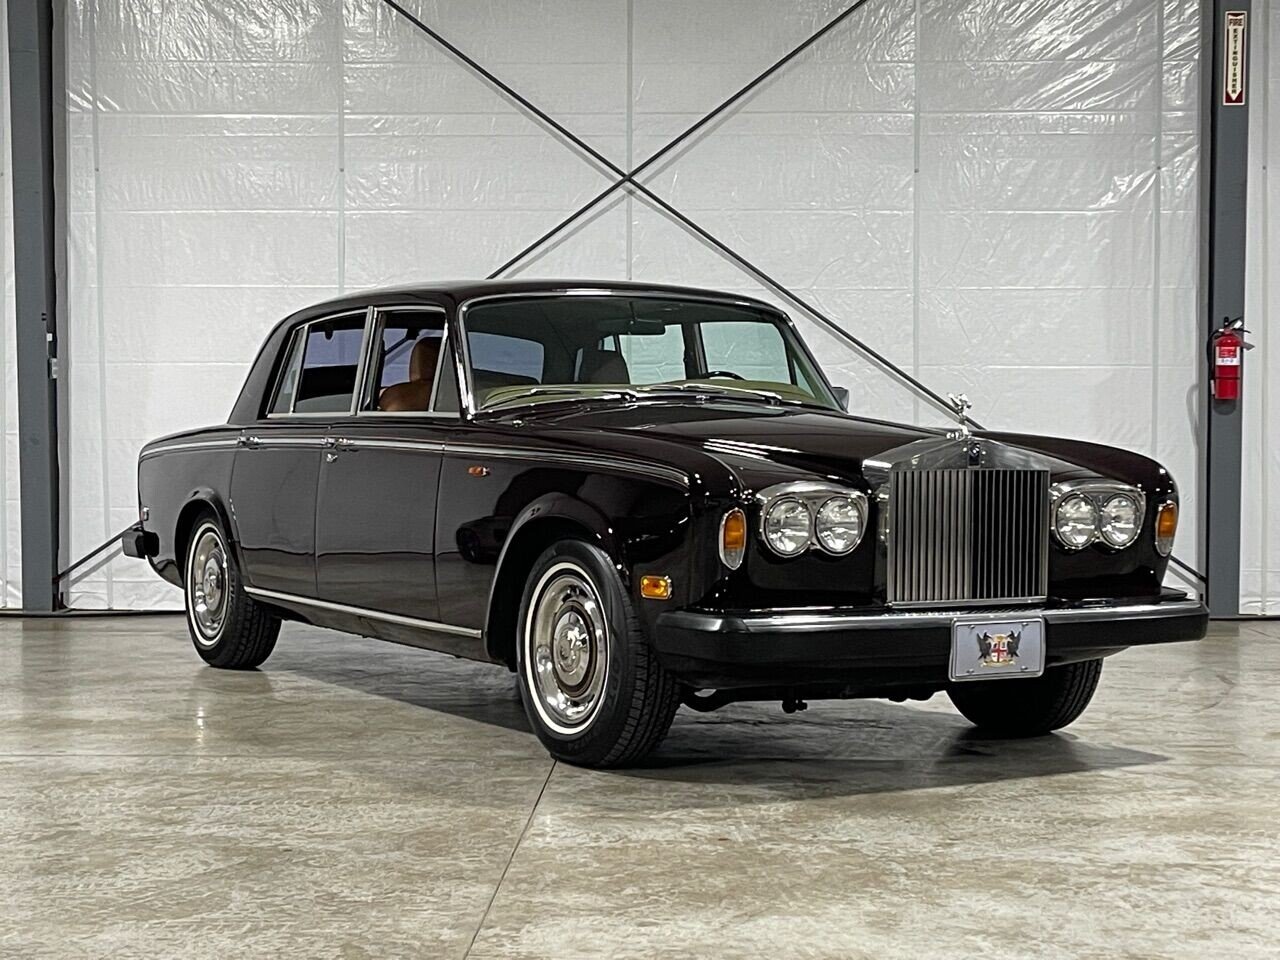 For Sale RollsRoyce Silver Shadow II 1980 offered for 32000